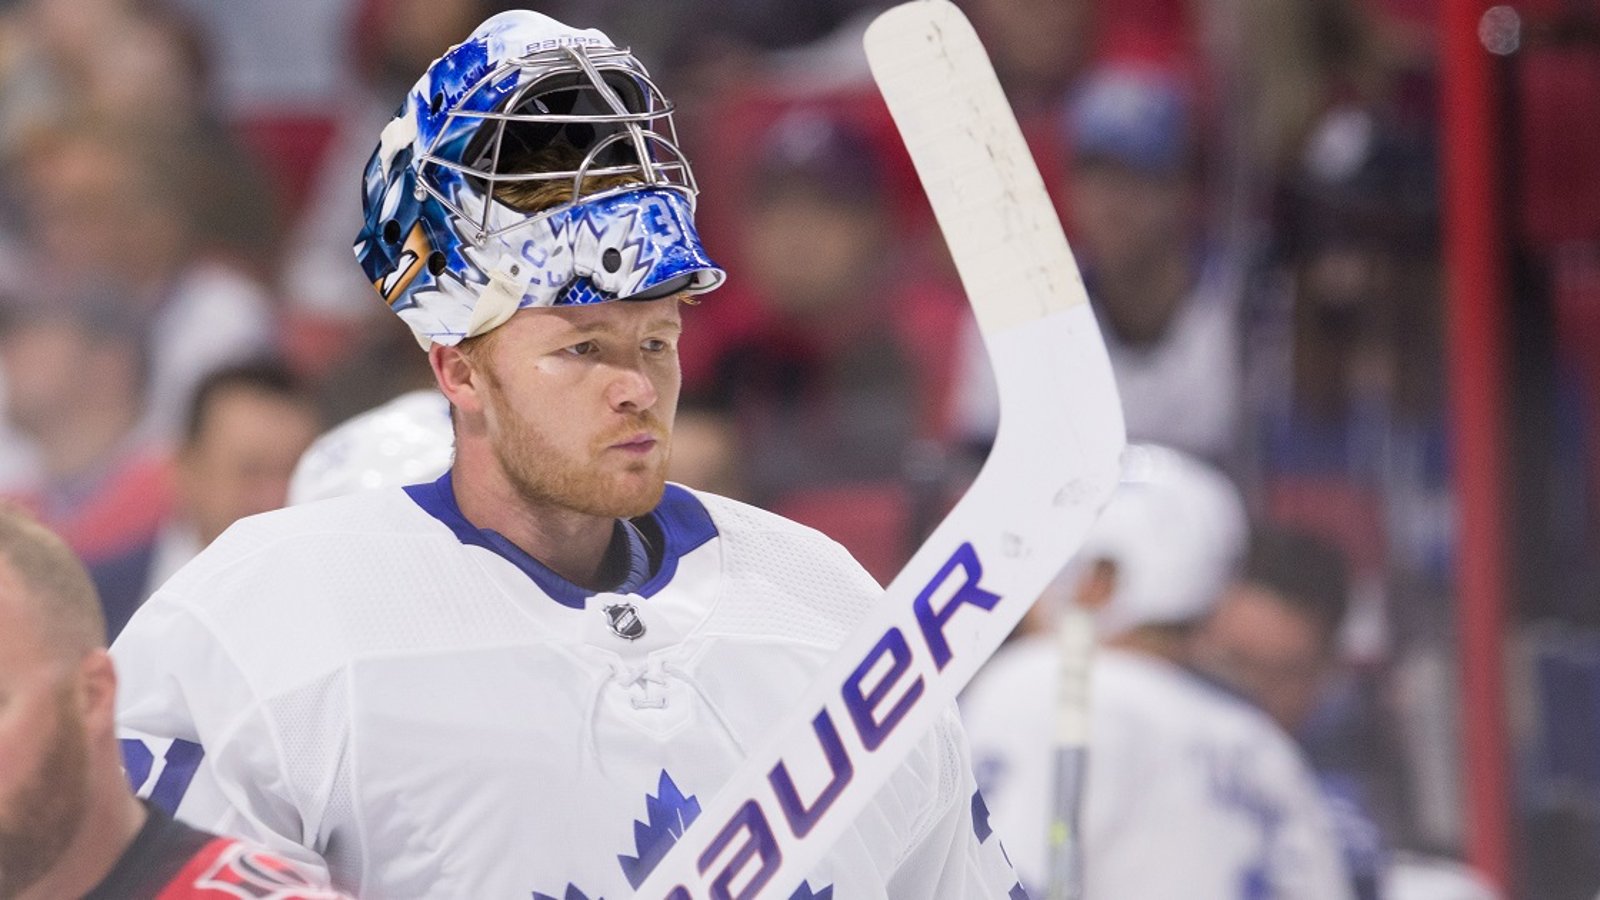 “I think we have seen the last game from Frederik Andersen in a Toronto Maple Leafs uniform”